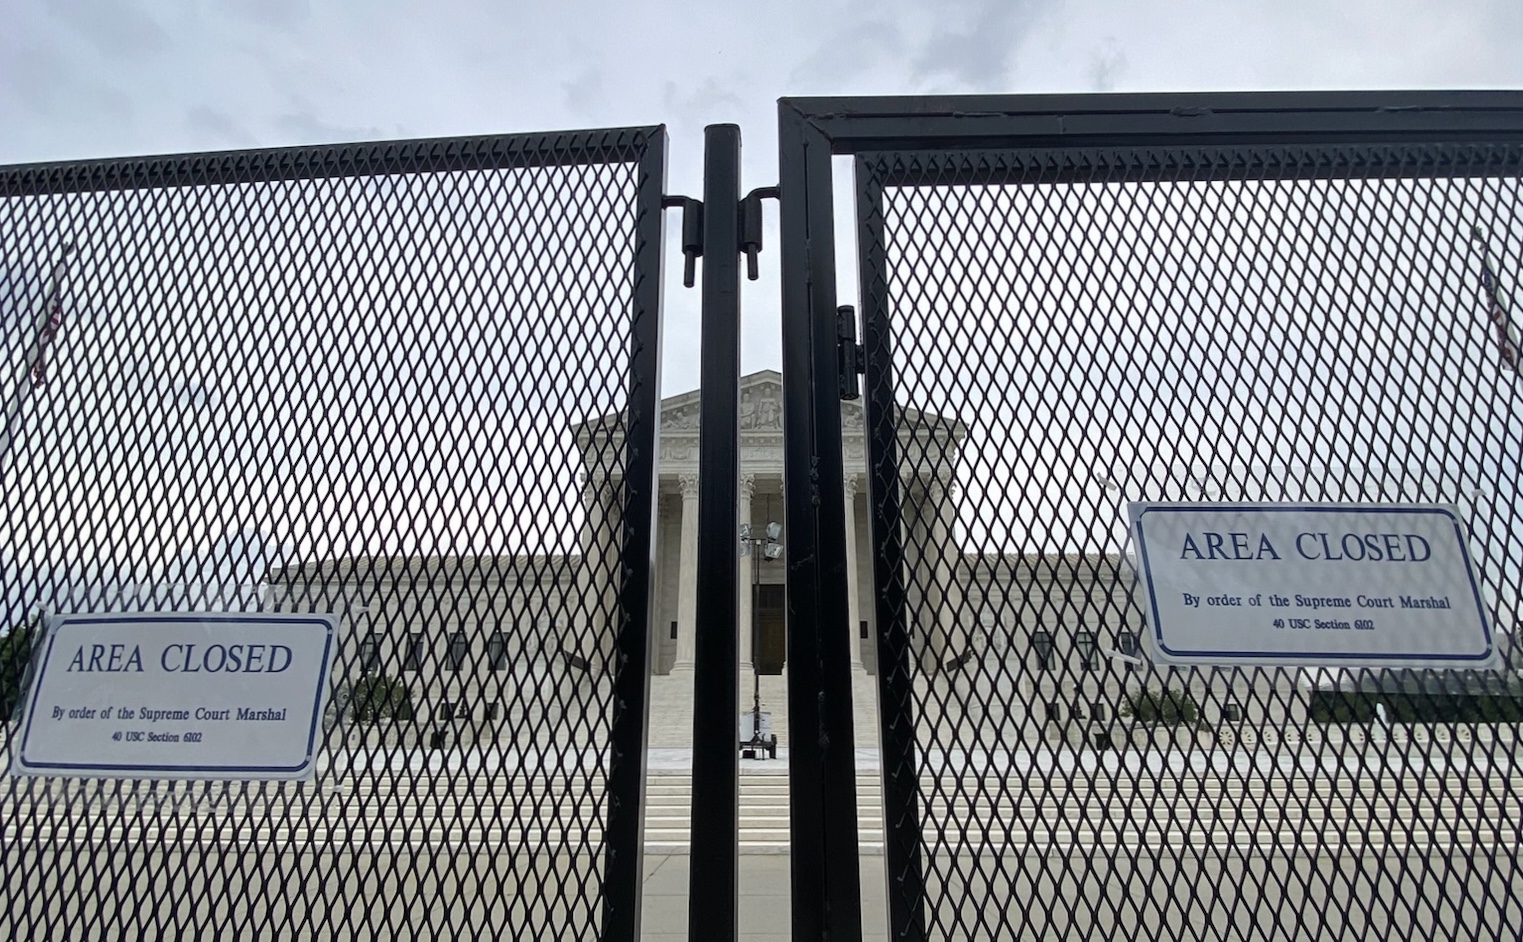 close up photo of chain-link security fence with front of supreme court building visible in background through the fence